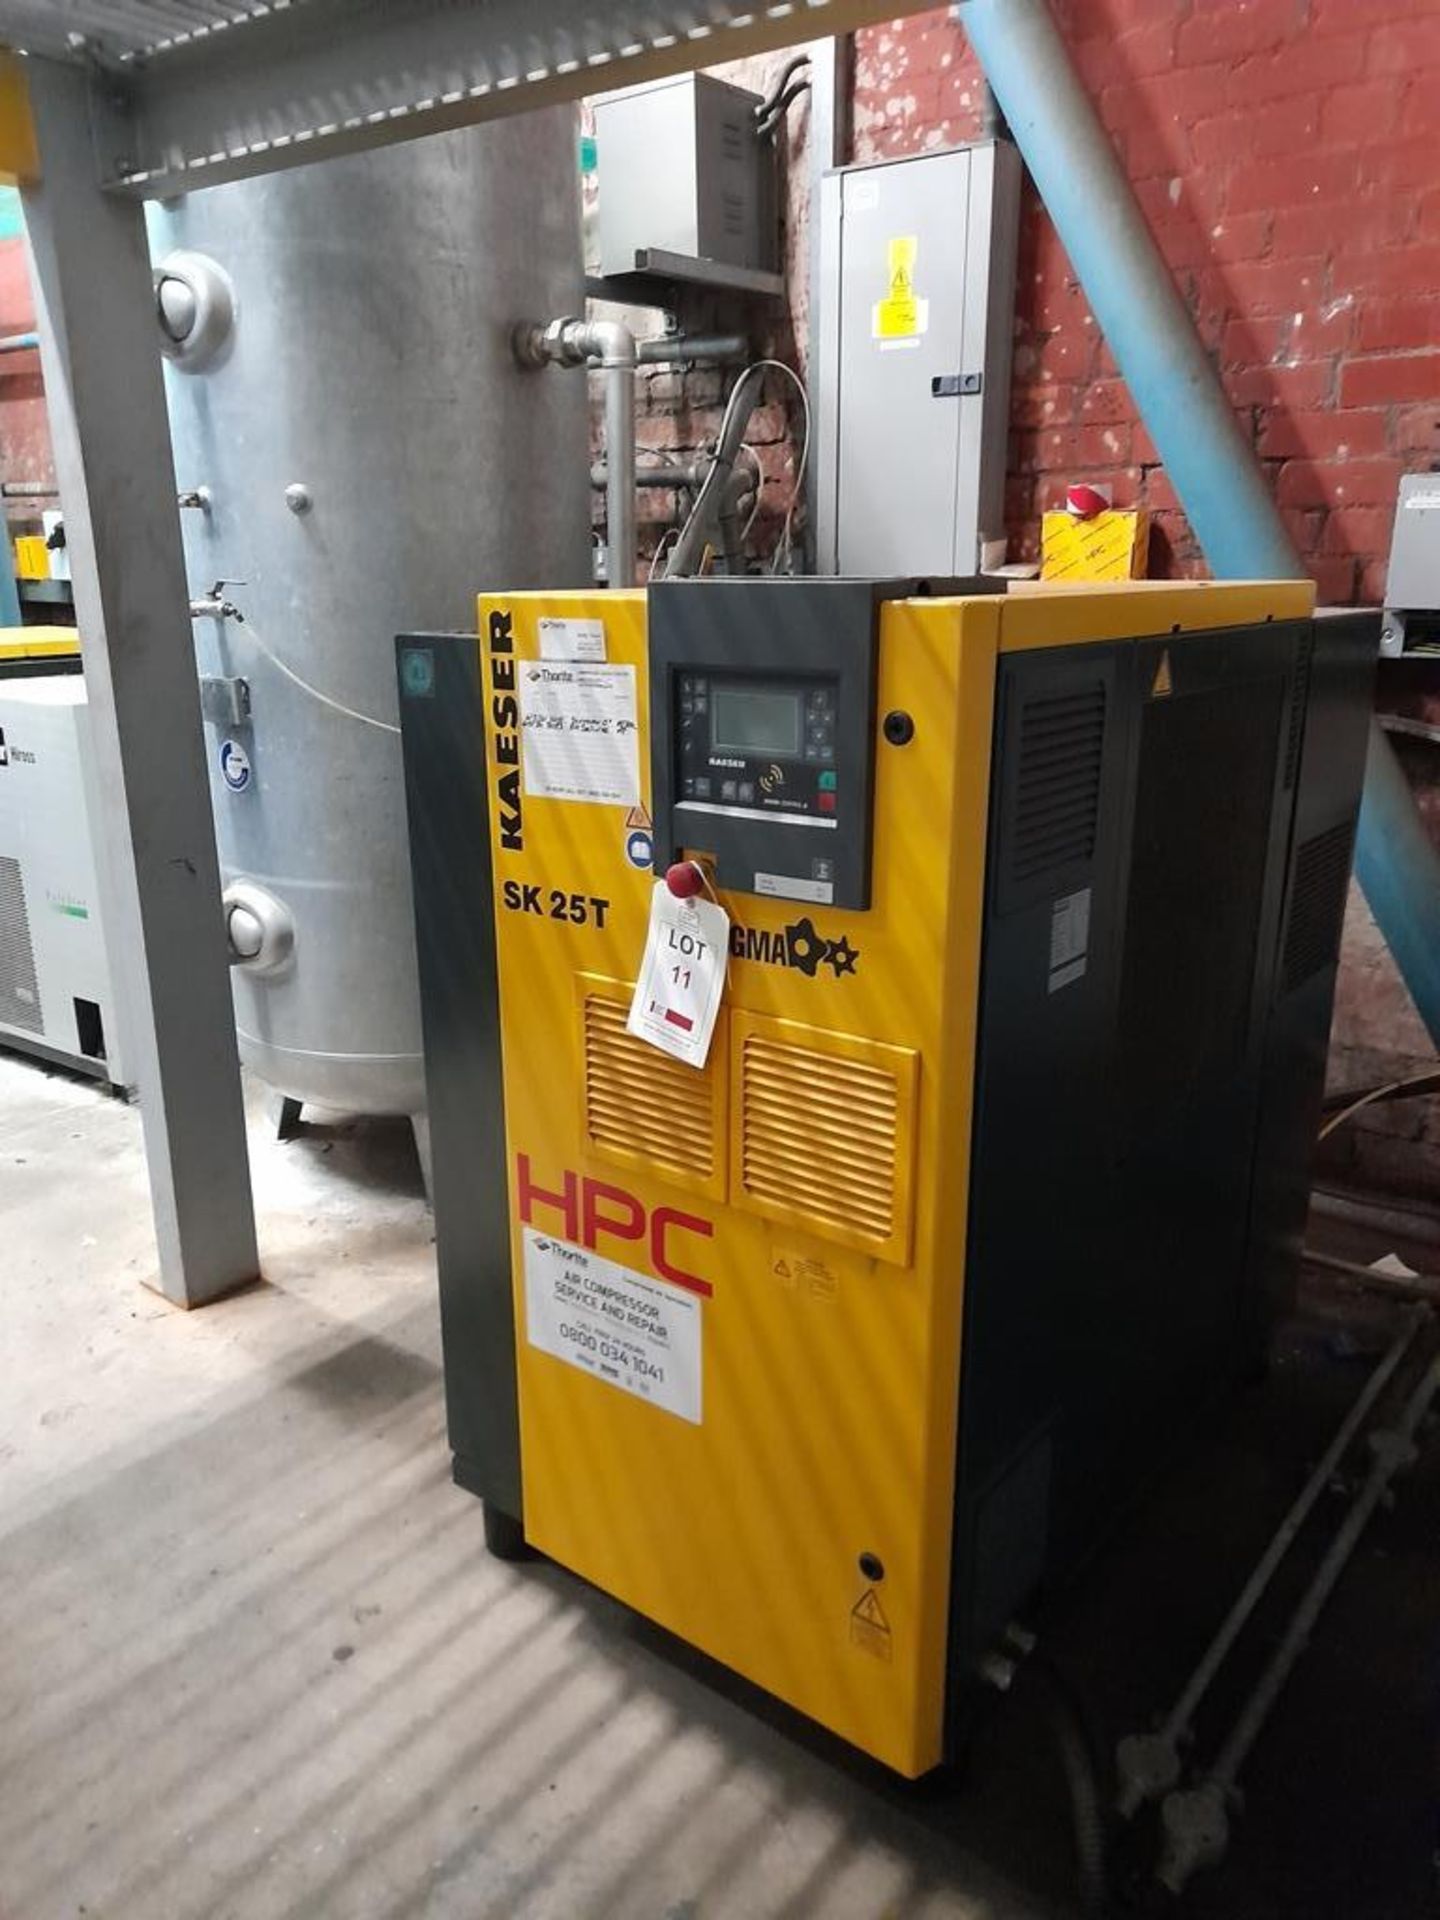 Kaeser HPC SK25 T SFC packaged air compressor, Serial no. 7577, Year 2016, with HPC OW12 oil/water - Image 4 of 7